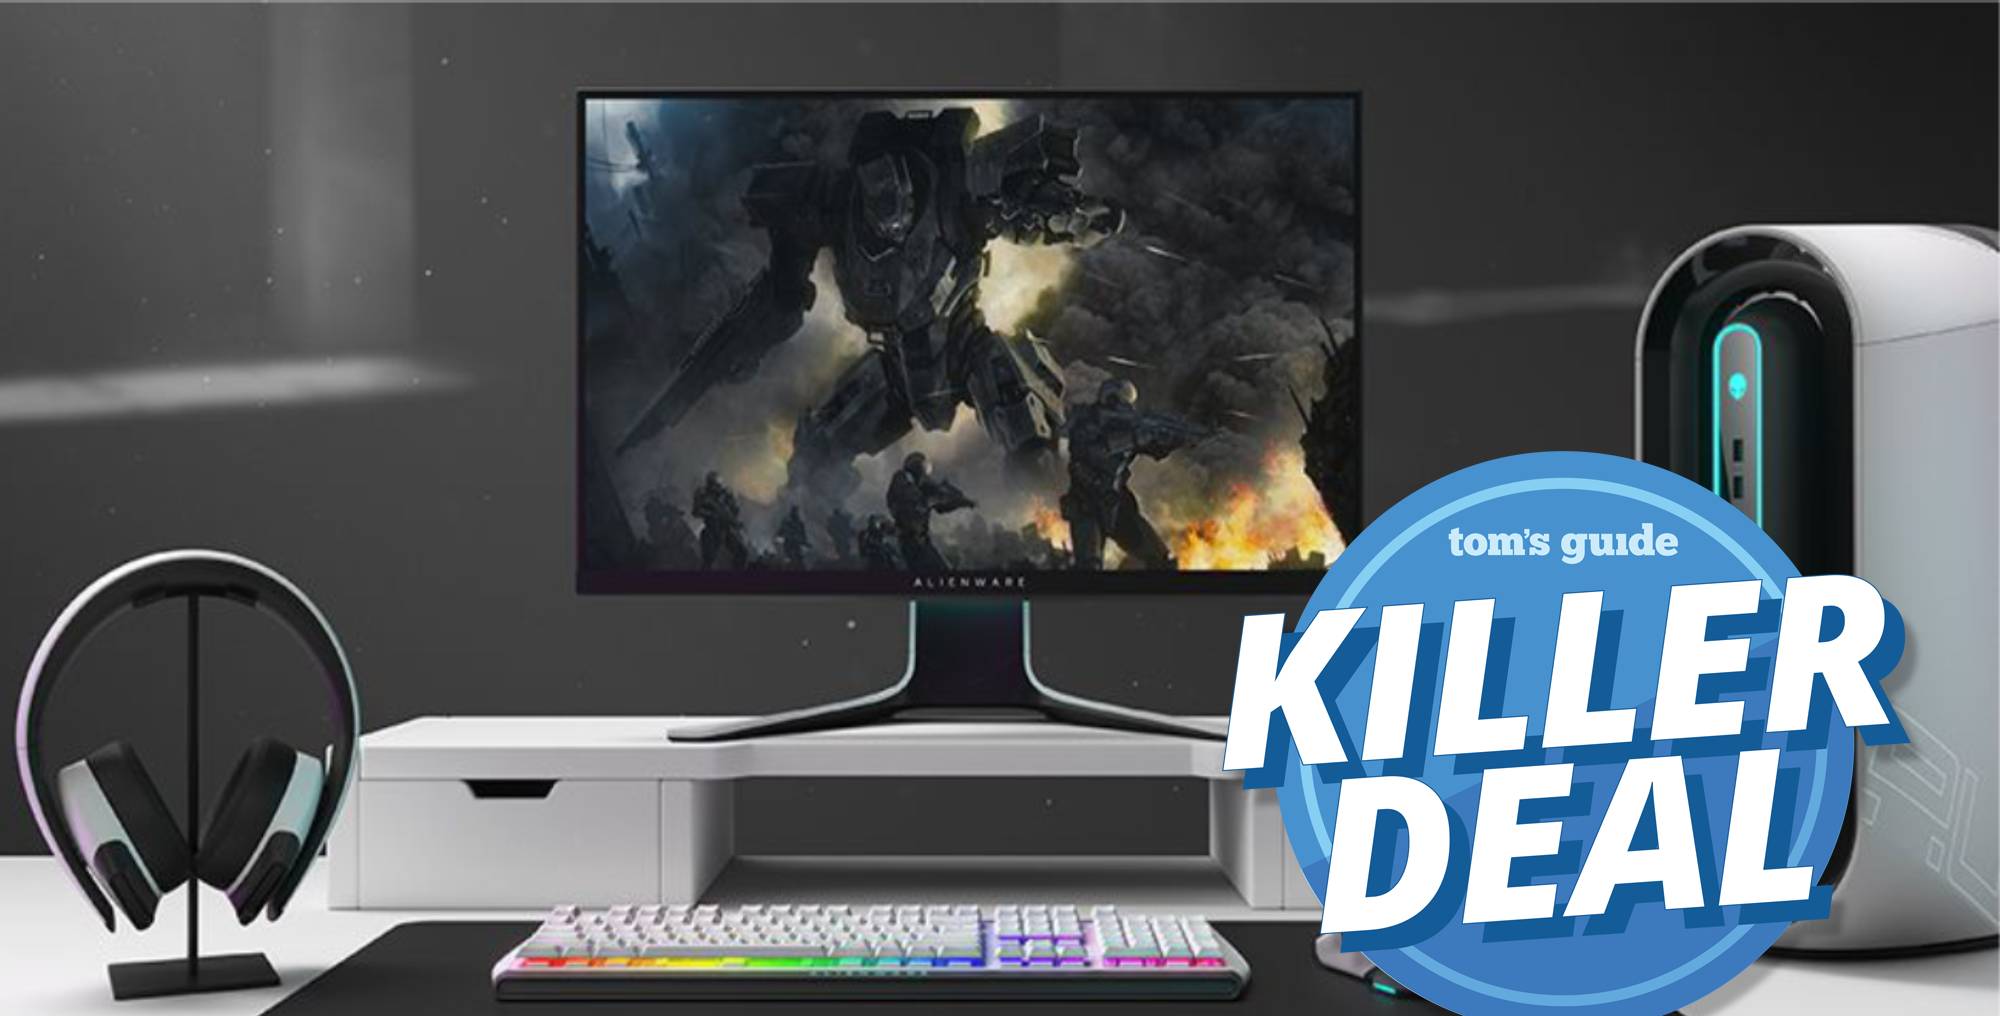 Killer Deal Alienware S Gorgeous 27 Inch Gaming Monitor Hits New Price Low Tom S Guide